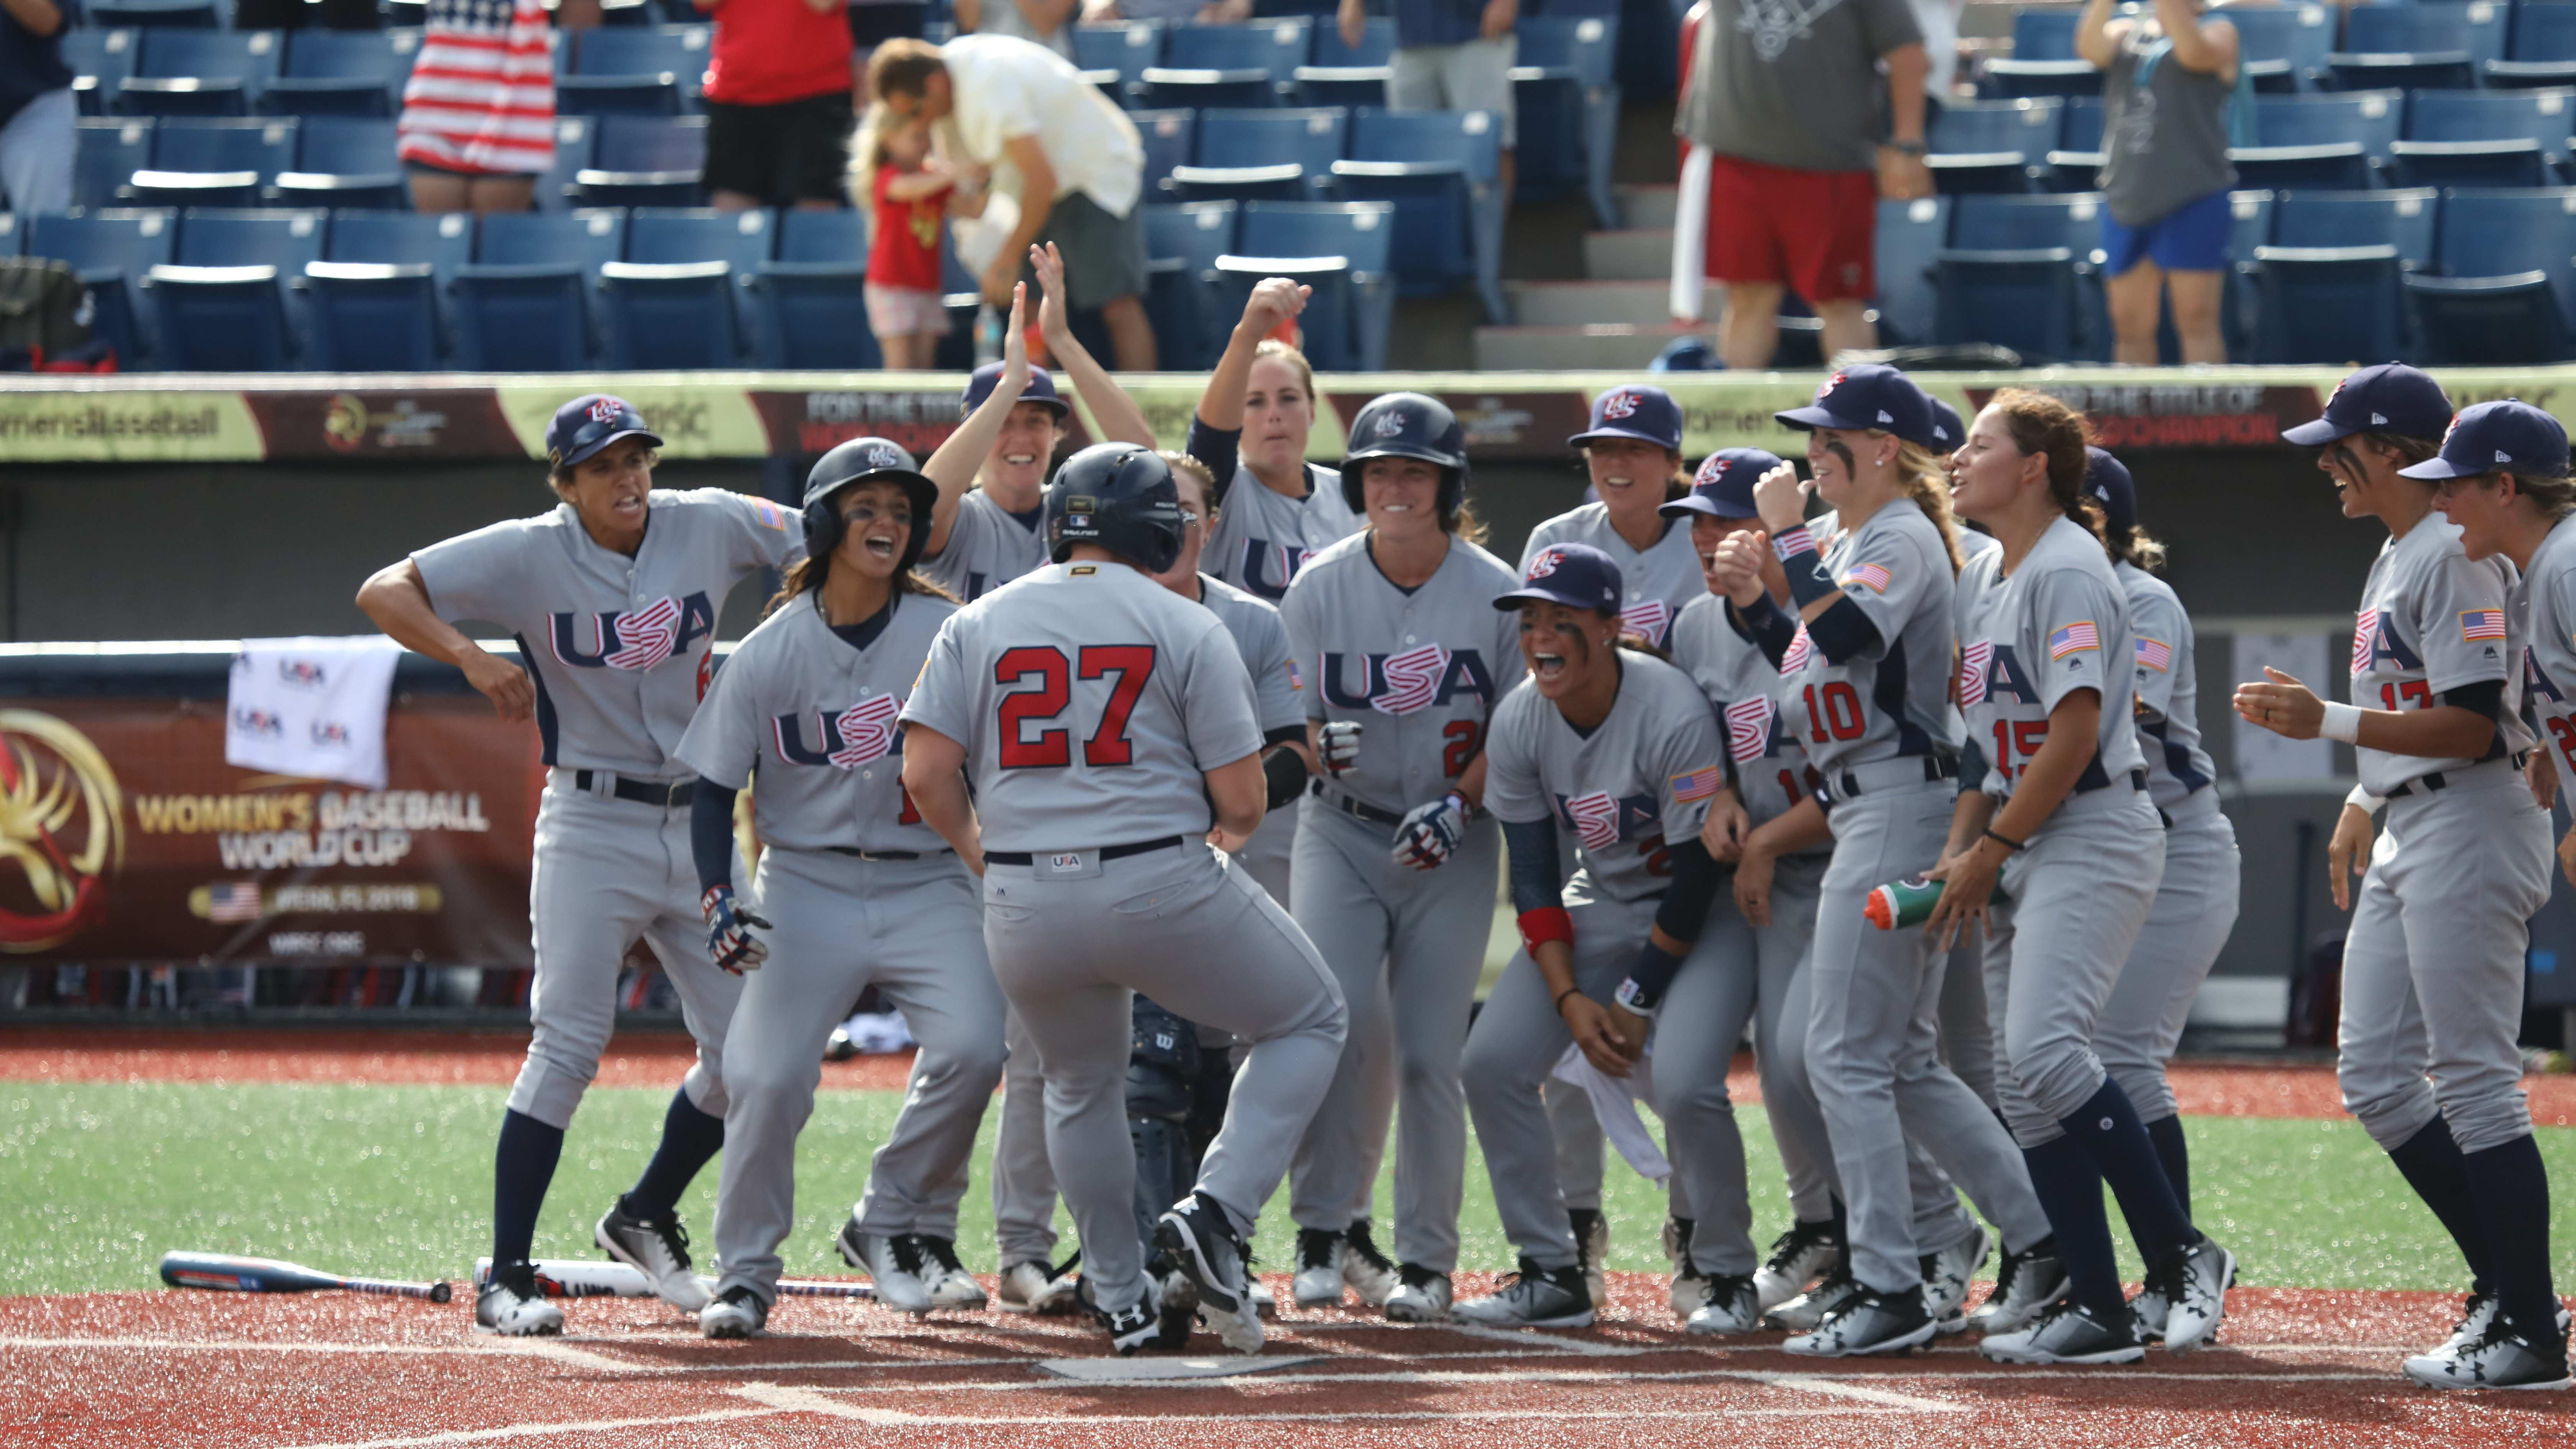 No. 14 Virginia doubles down on defense, shuts out No. 23 NC State baseball  7-0, Sports